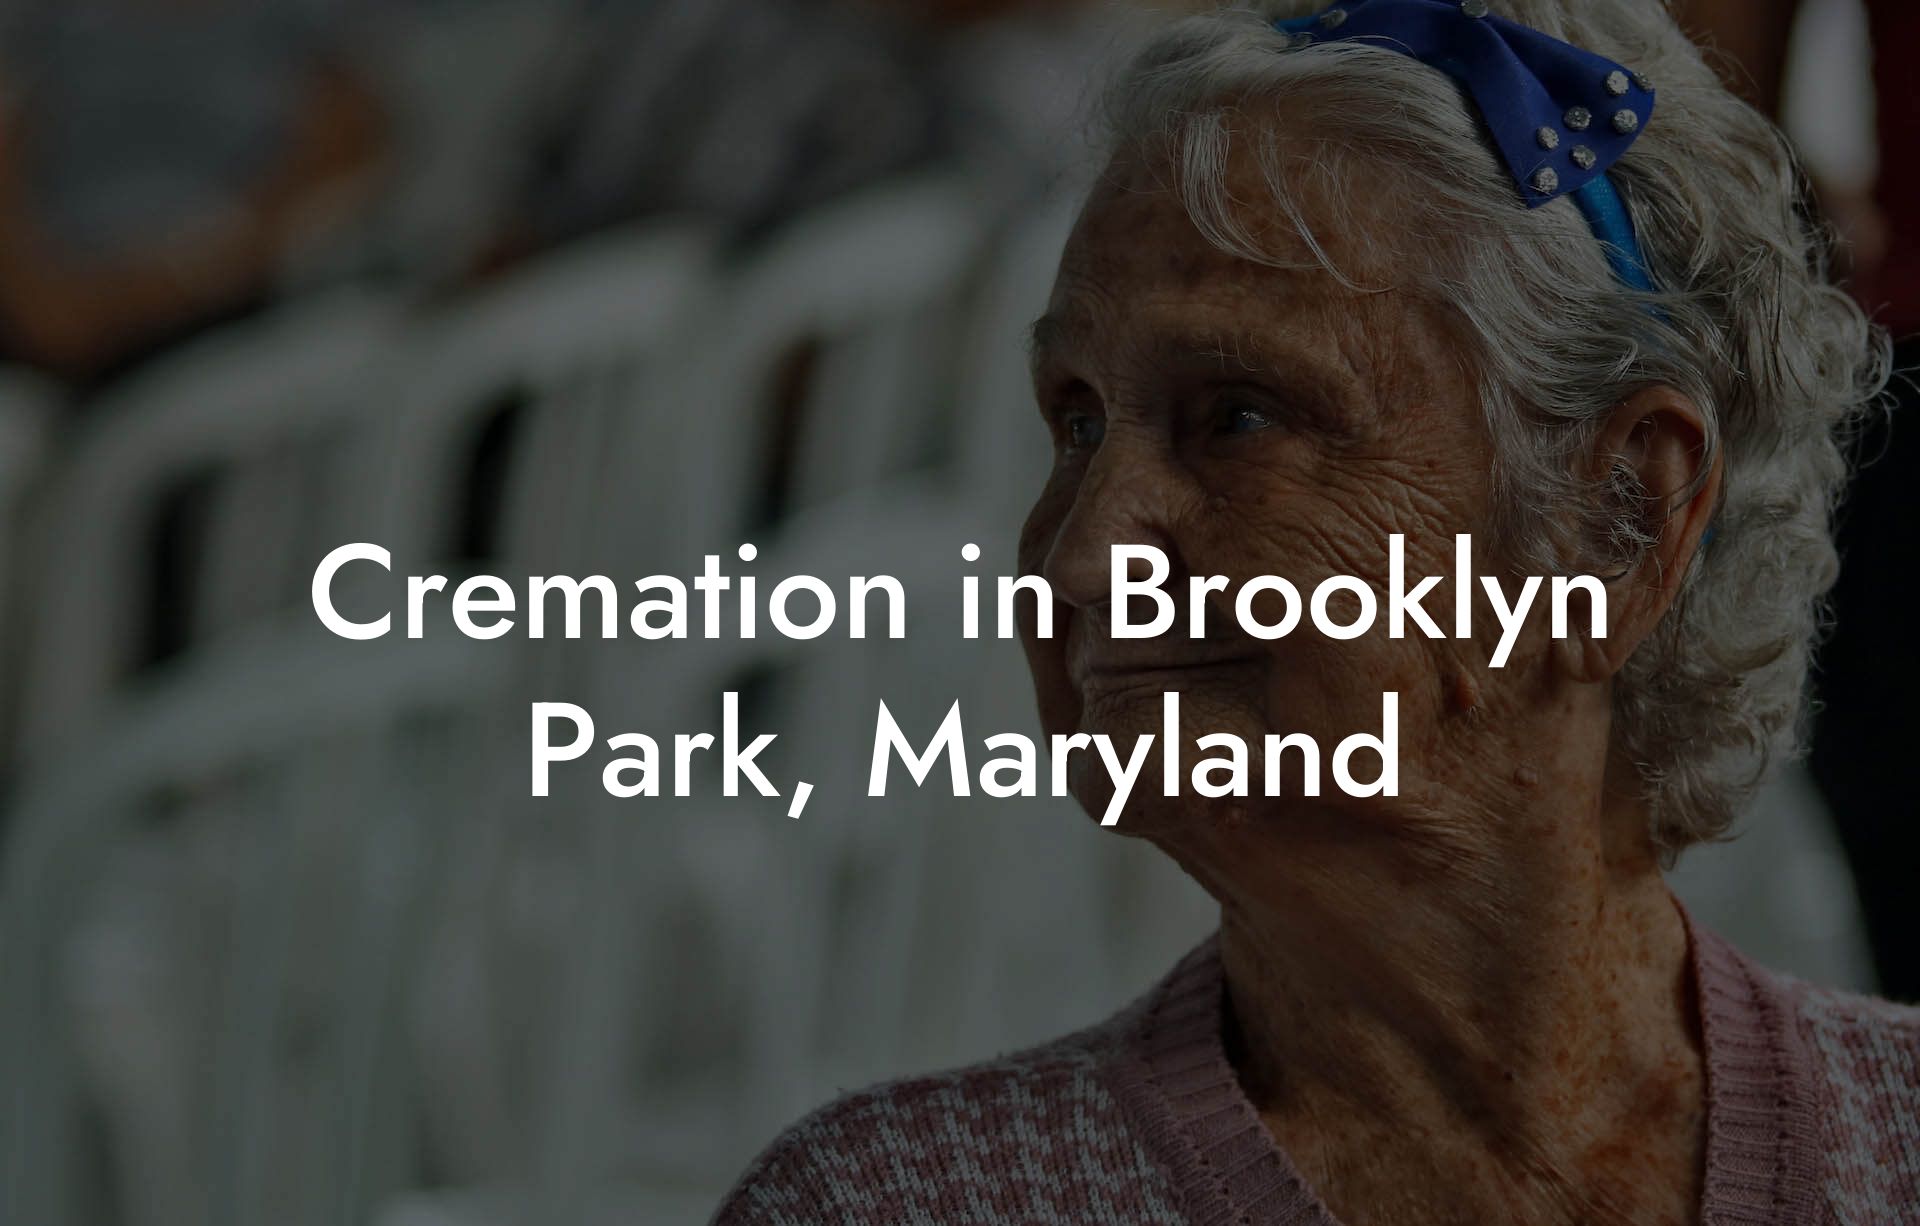 Cremation in Brooklyn Park, Maryland